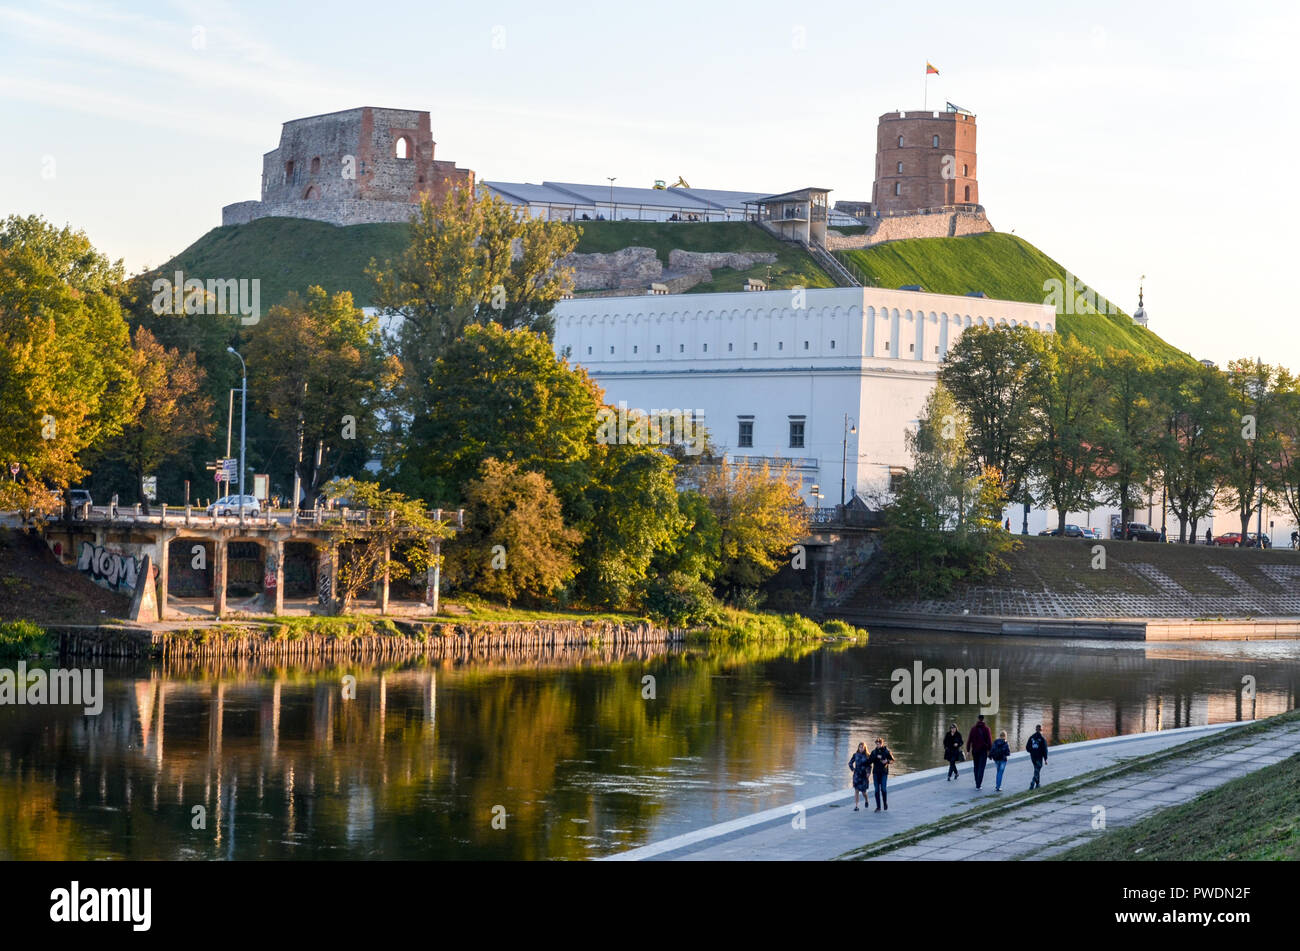 Gediminas Hill and tower castle, in Vilnius, Lithuania, by the Neris river, with people walking on the promenade Stock Photo